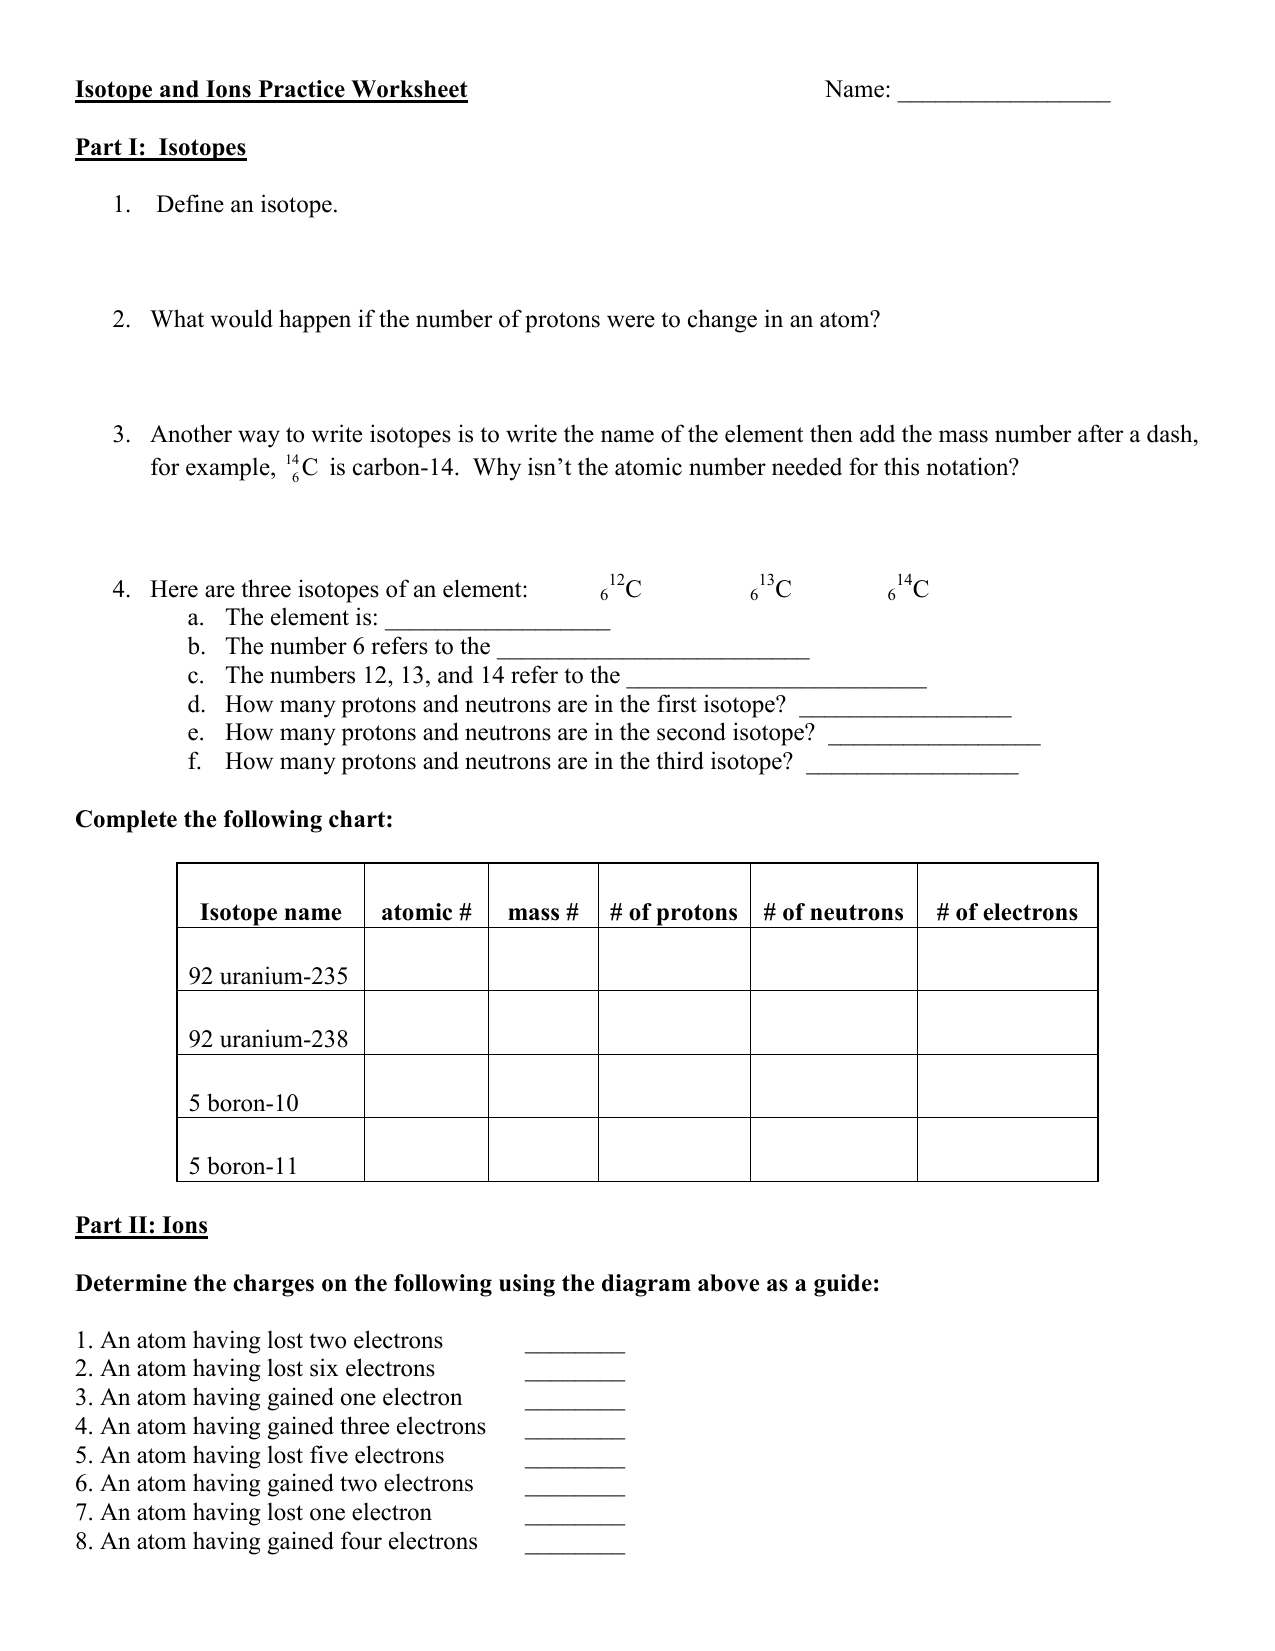 Isotope and Ions Practice Worksheet Name (20) For Isotope Practice Worksheet Answers